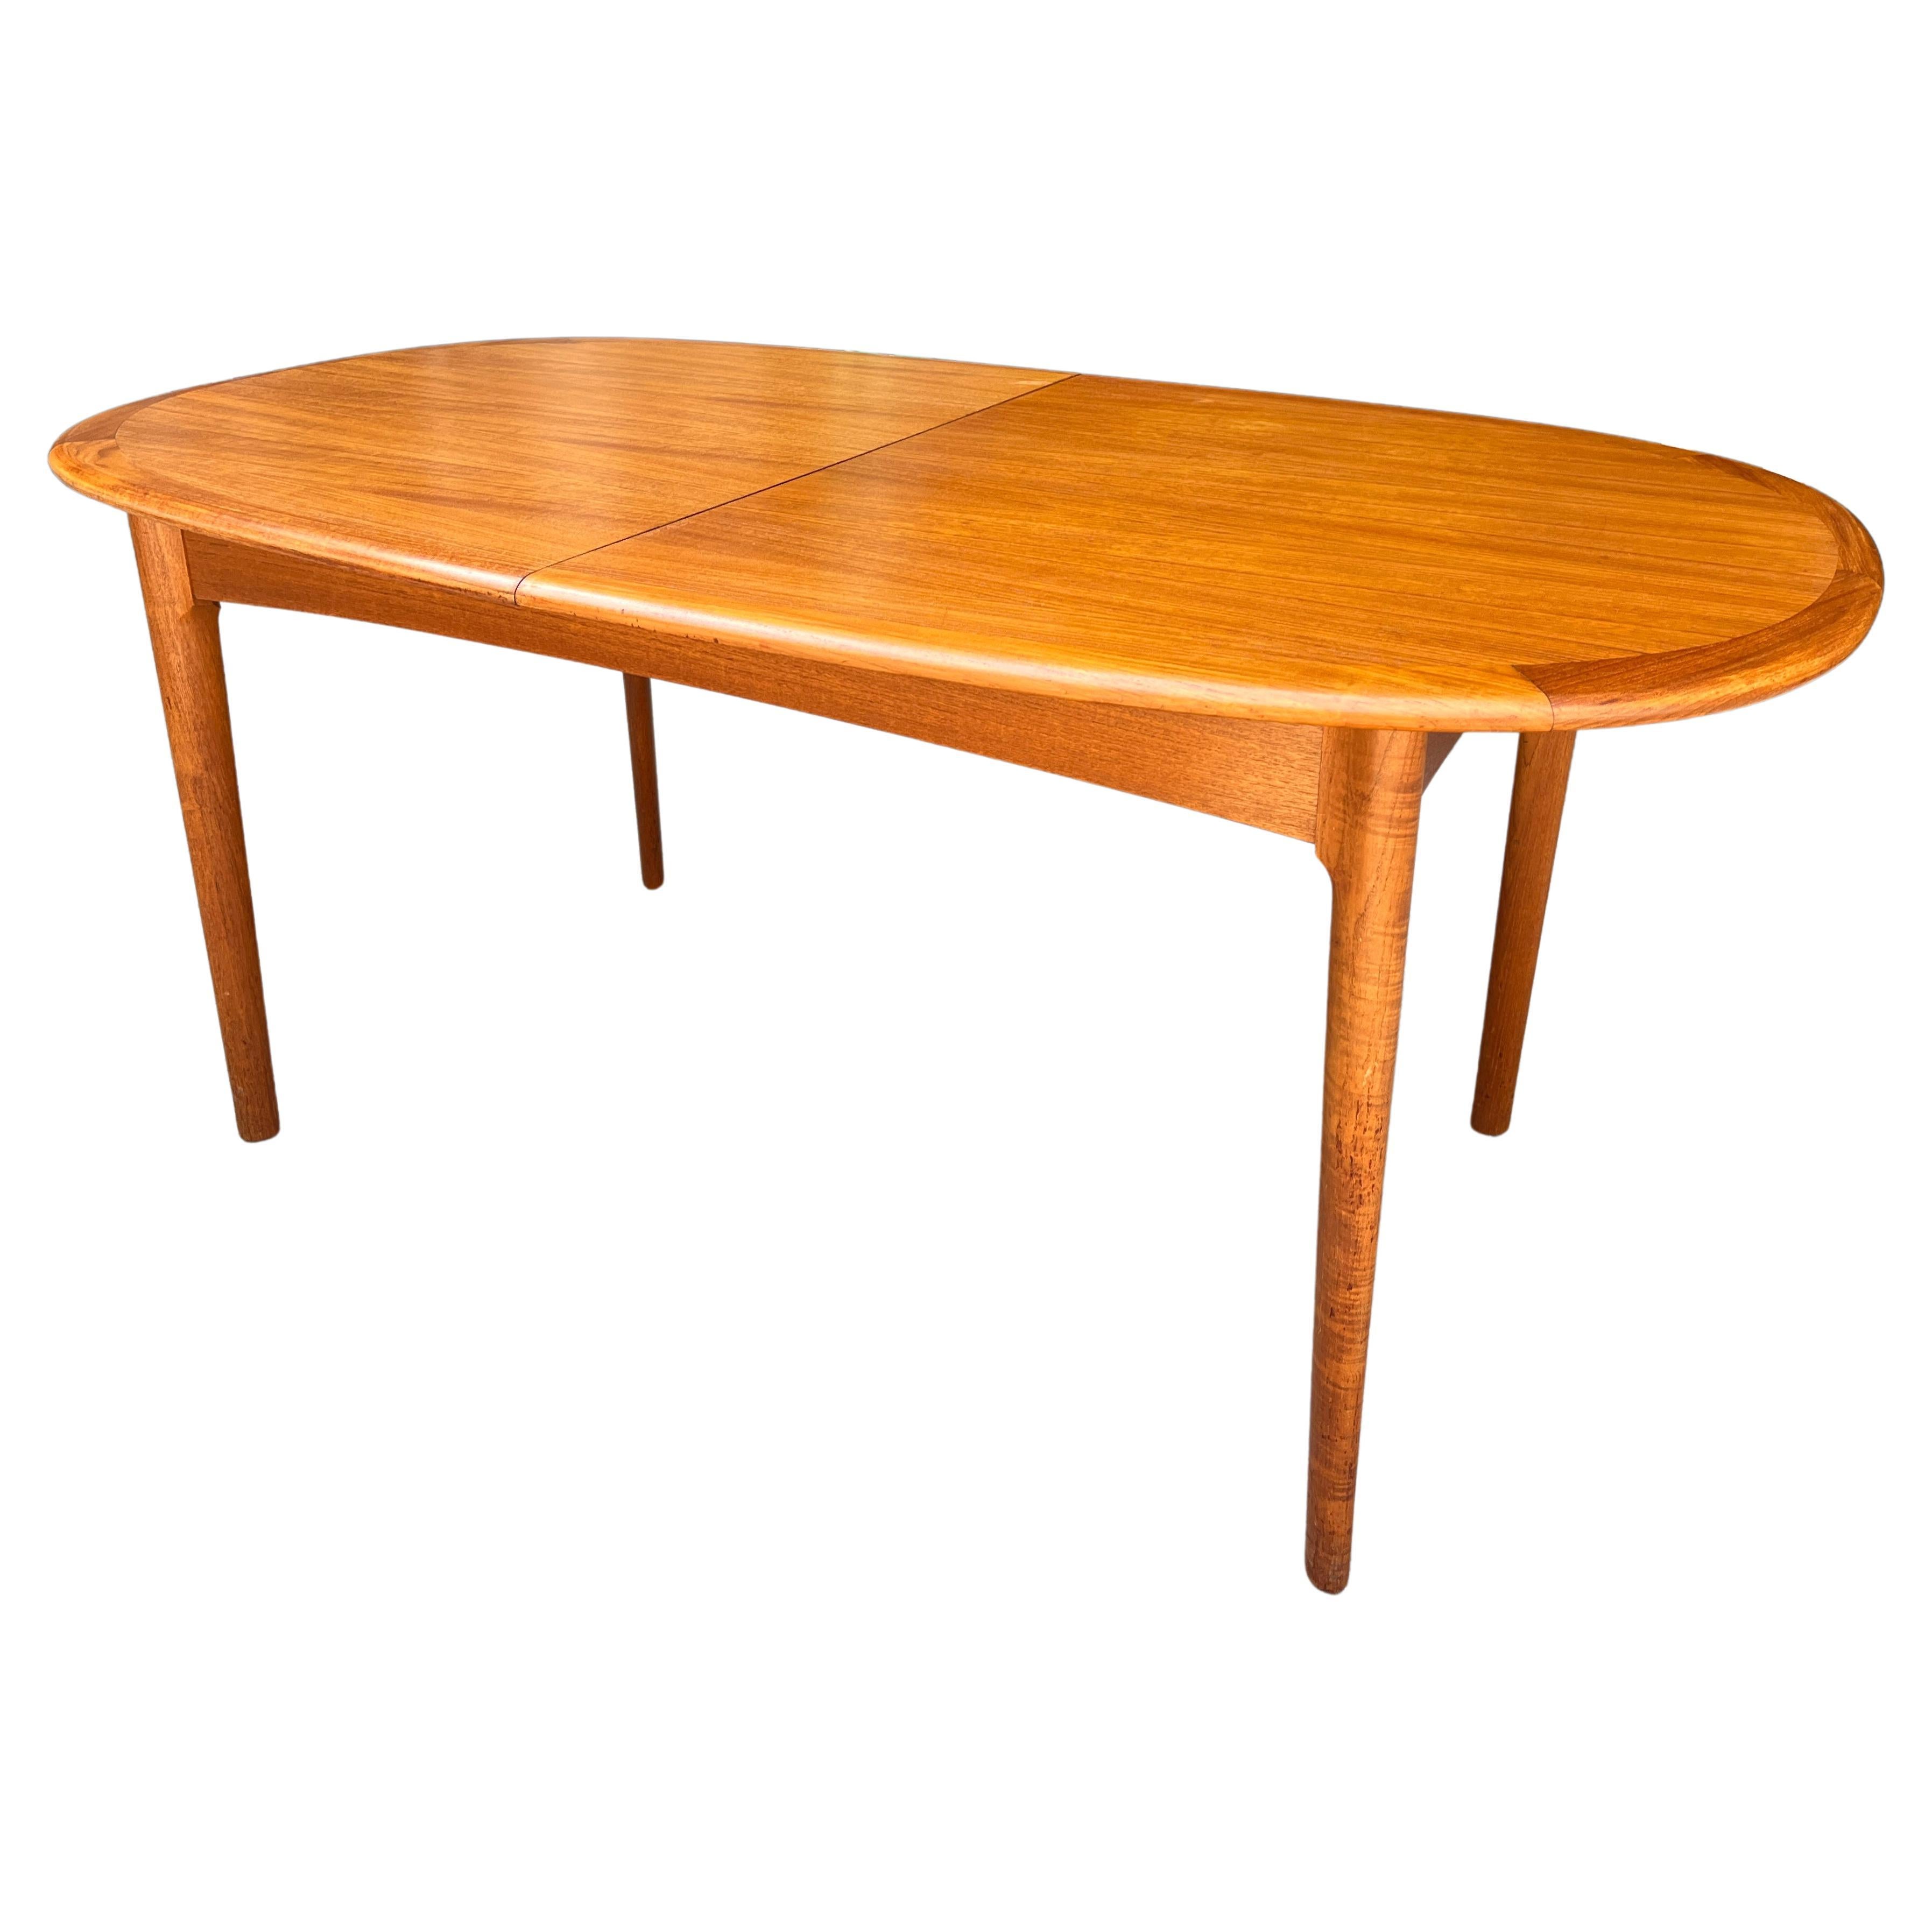 Midcentury Elliptical Oval Teak Expandable Dining Table  For Sale 1